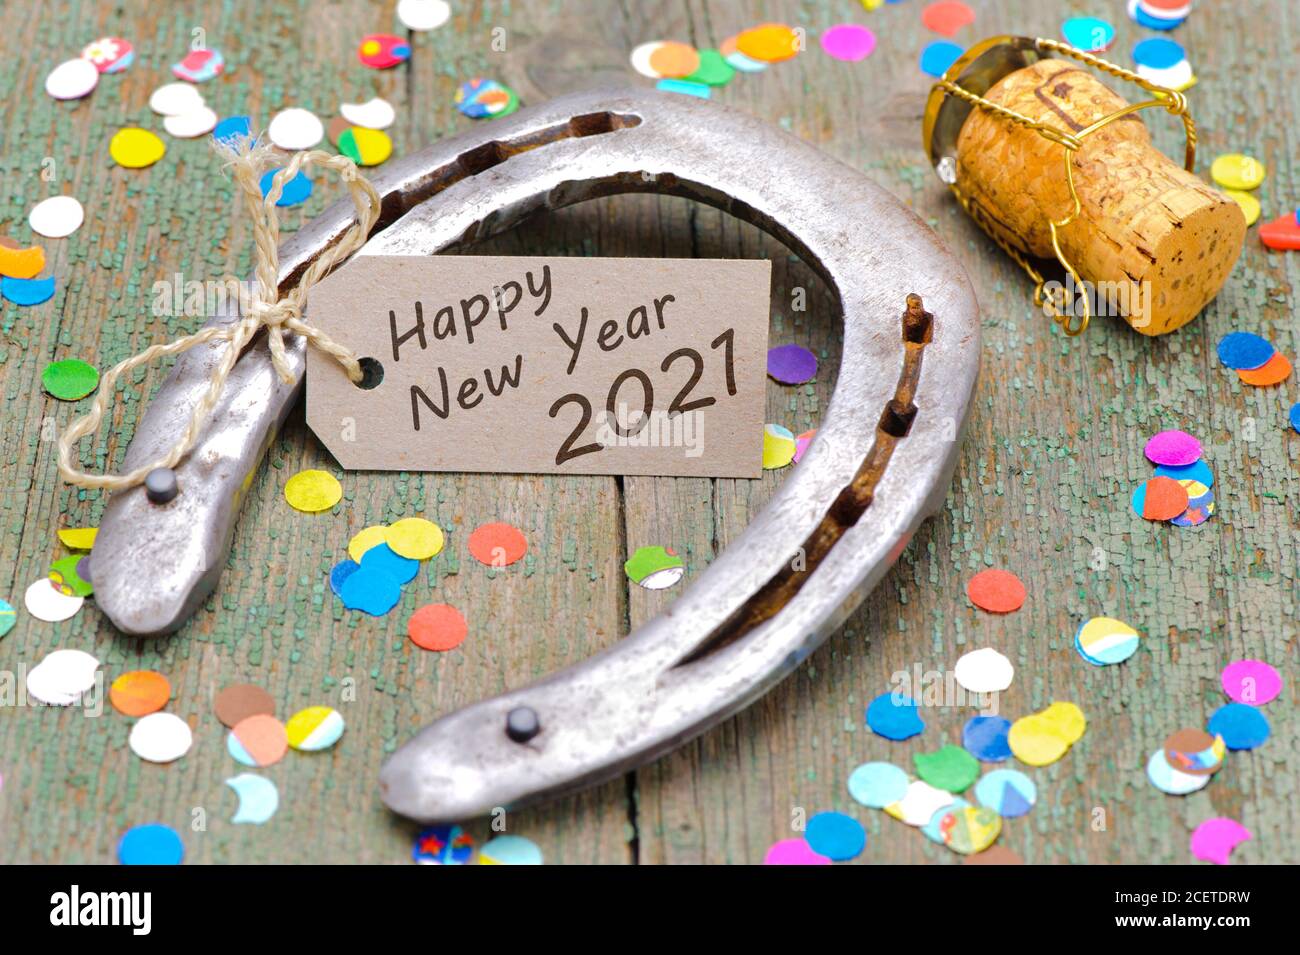 horse shoe with greetings for new year 2021 Stock Photo